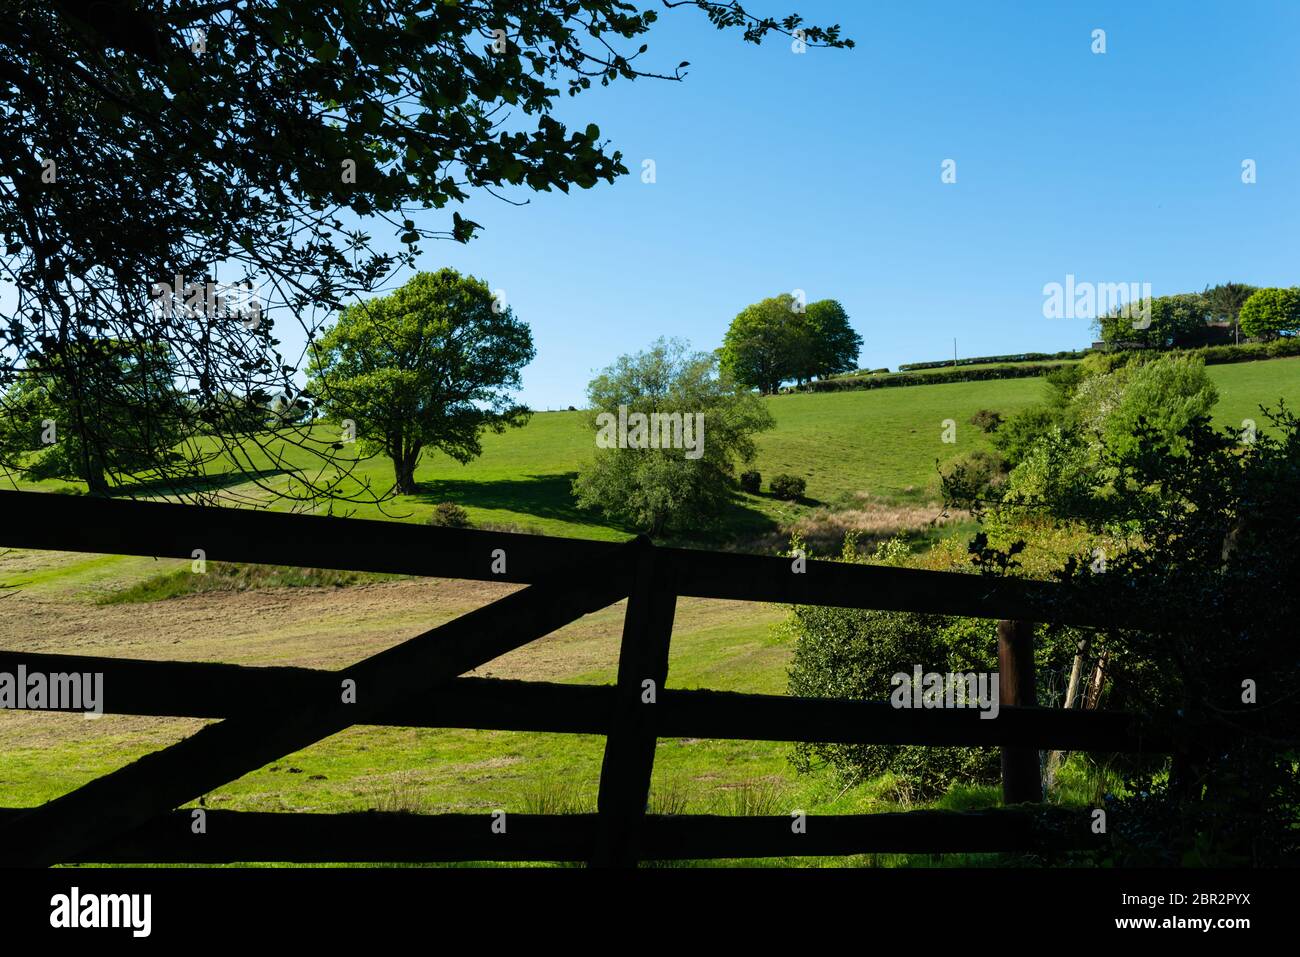 Silhouette of a gate looking into a field with trees Stock Photo